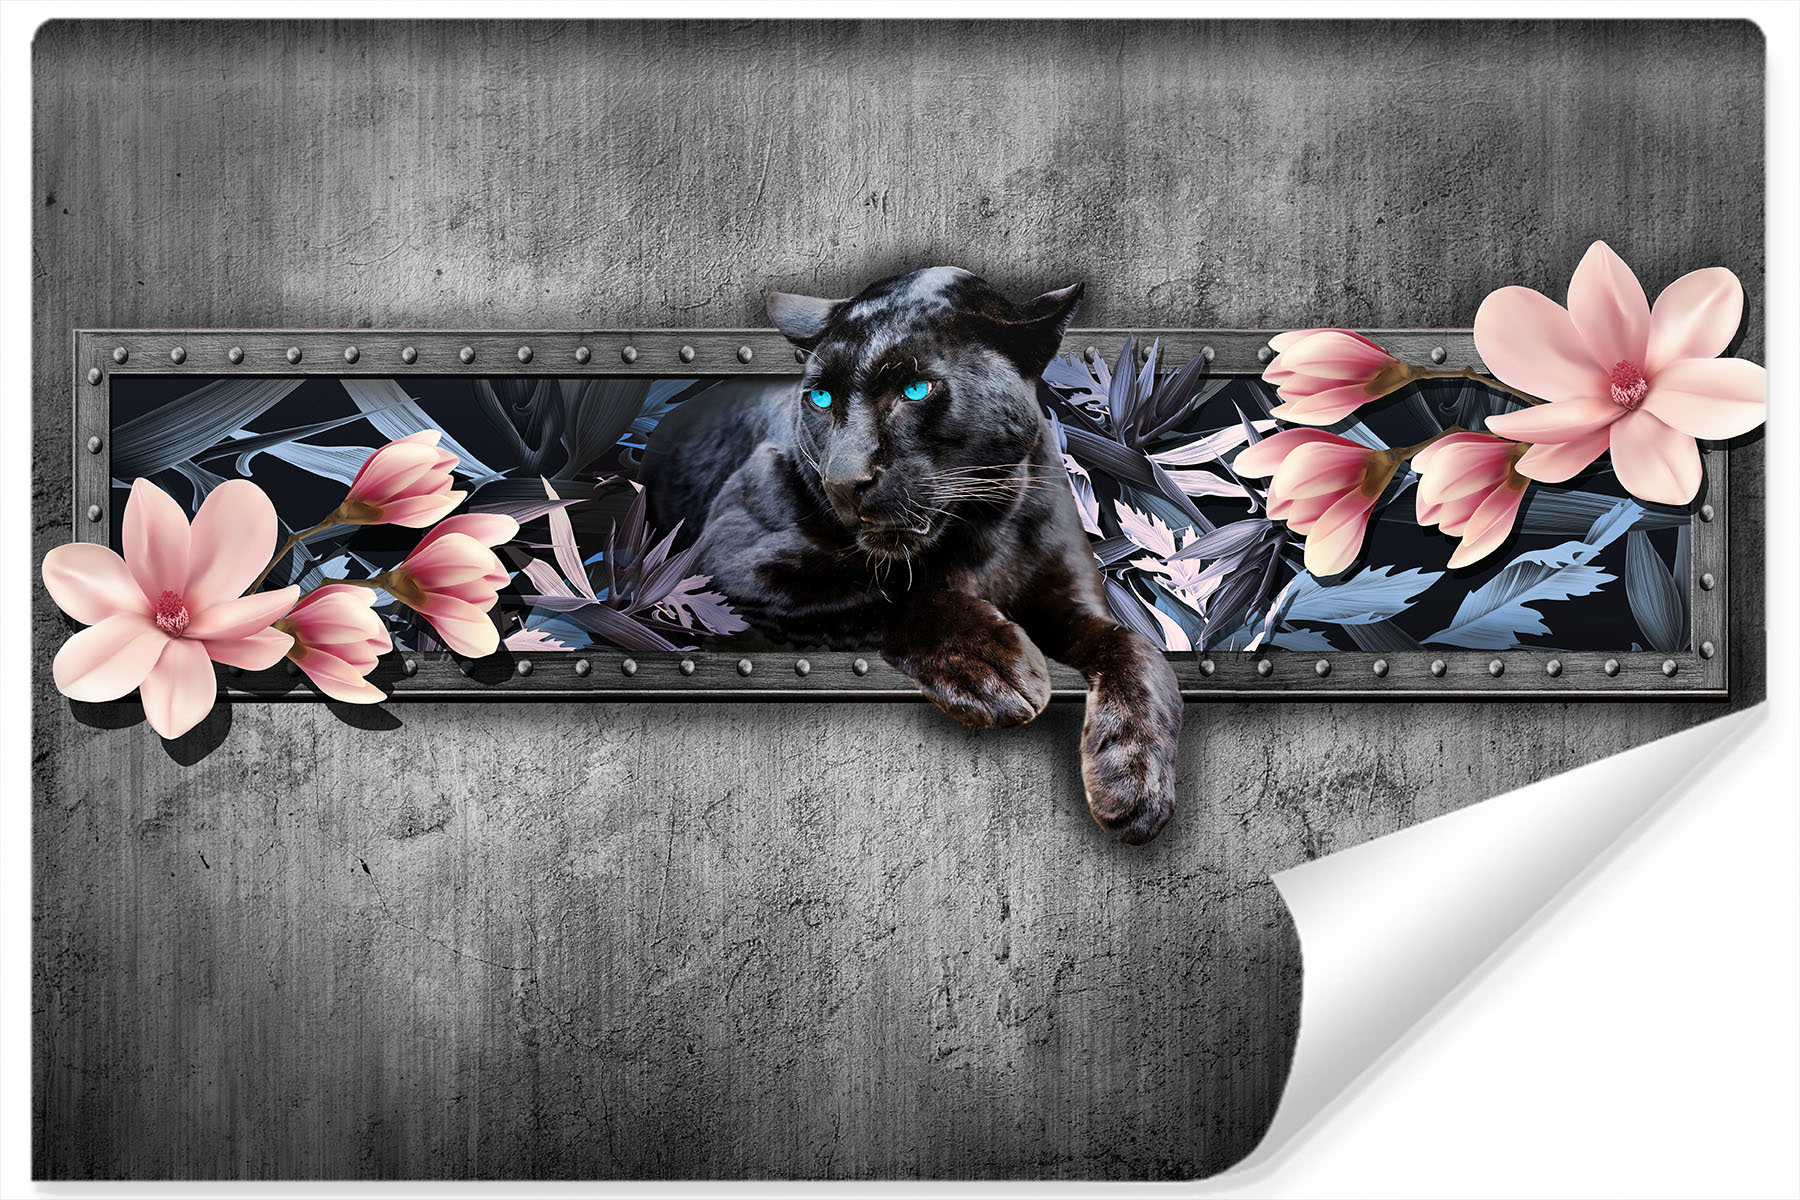 Photo wallpaper Panther with magnolia blossoms Non-woven 104x70,5 cm FT-3615-VEM